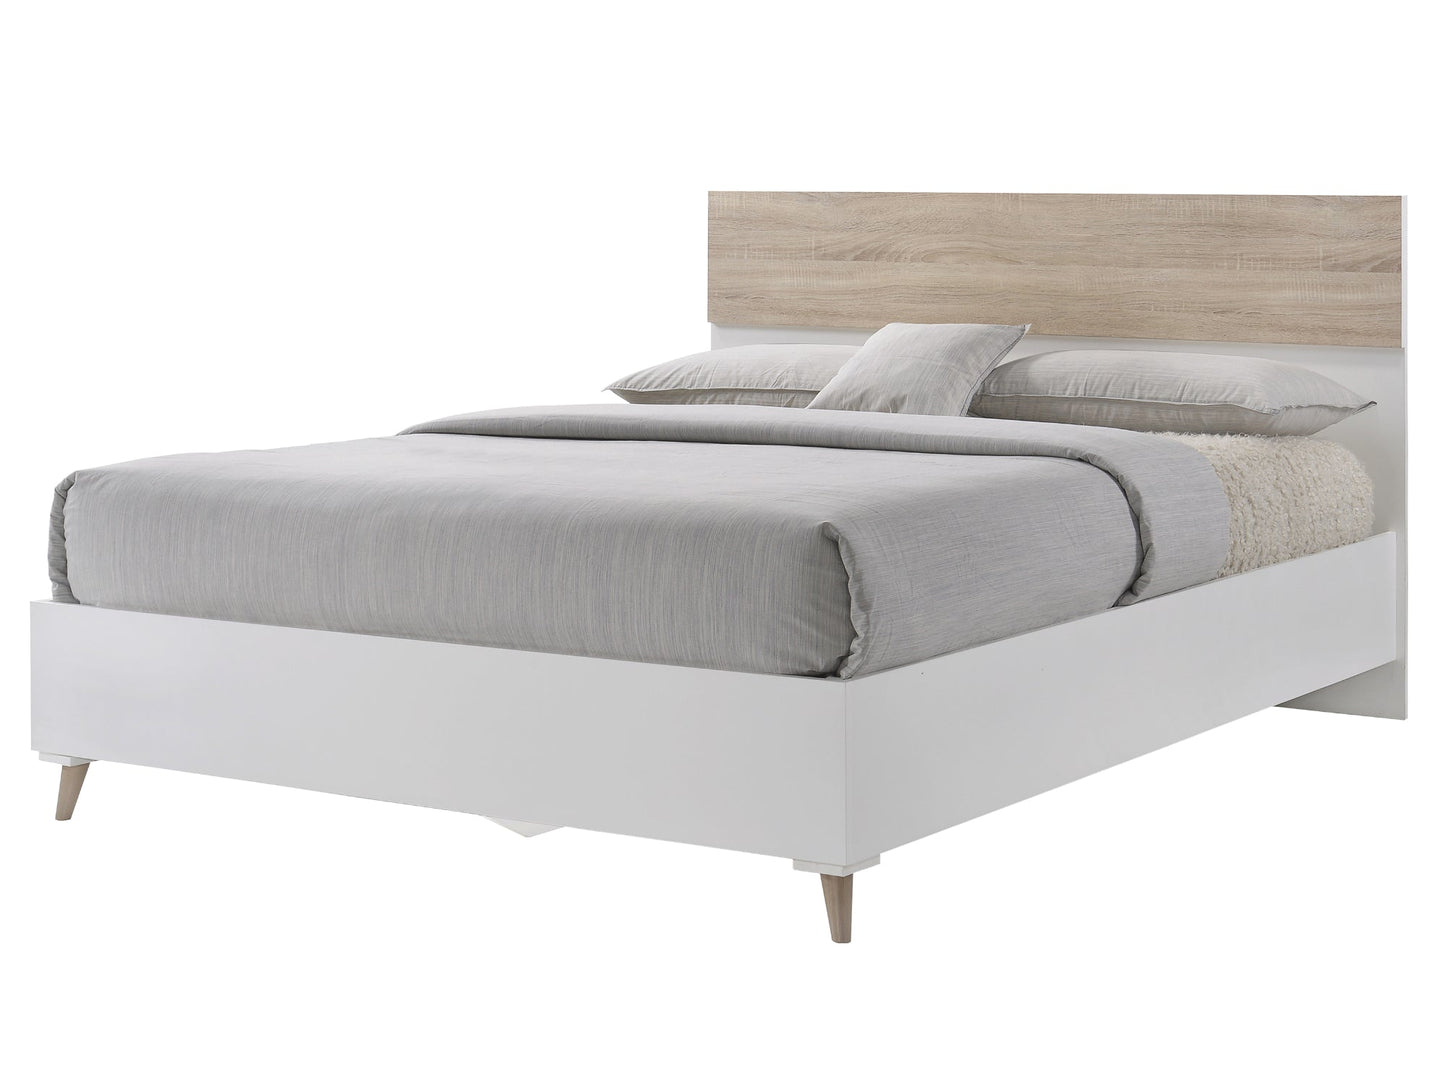 Stockholme Bed Frame in White and Oak